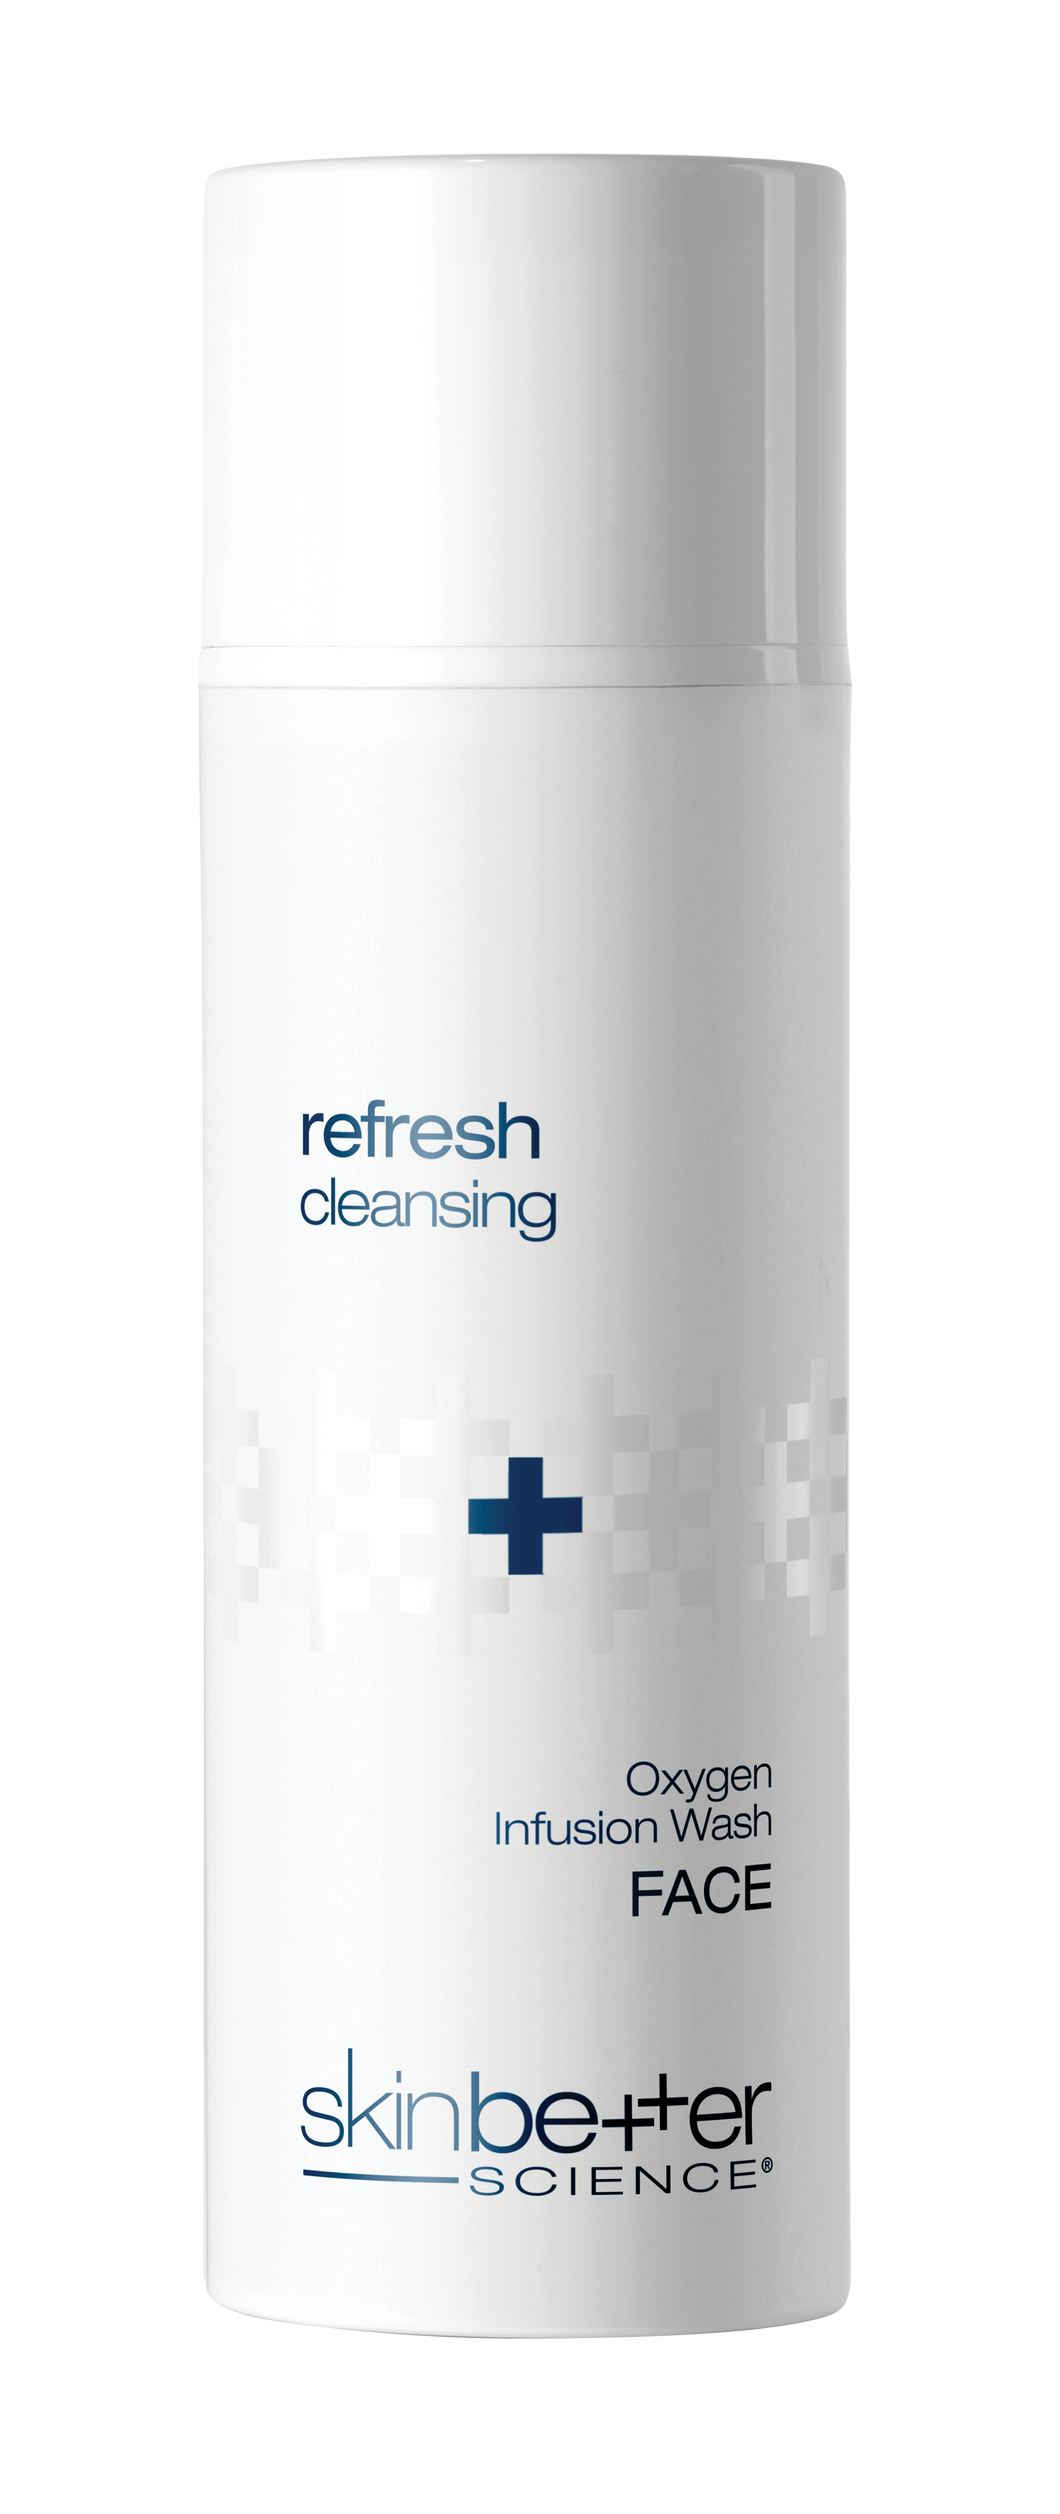 Oxygen Infusion Wash